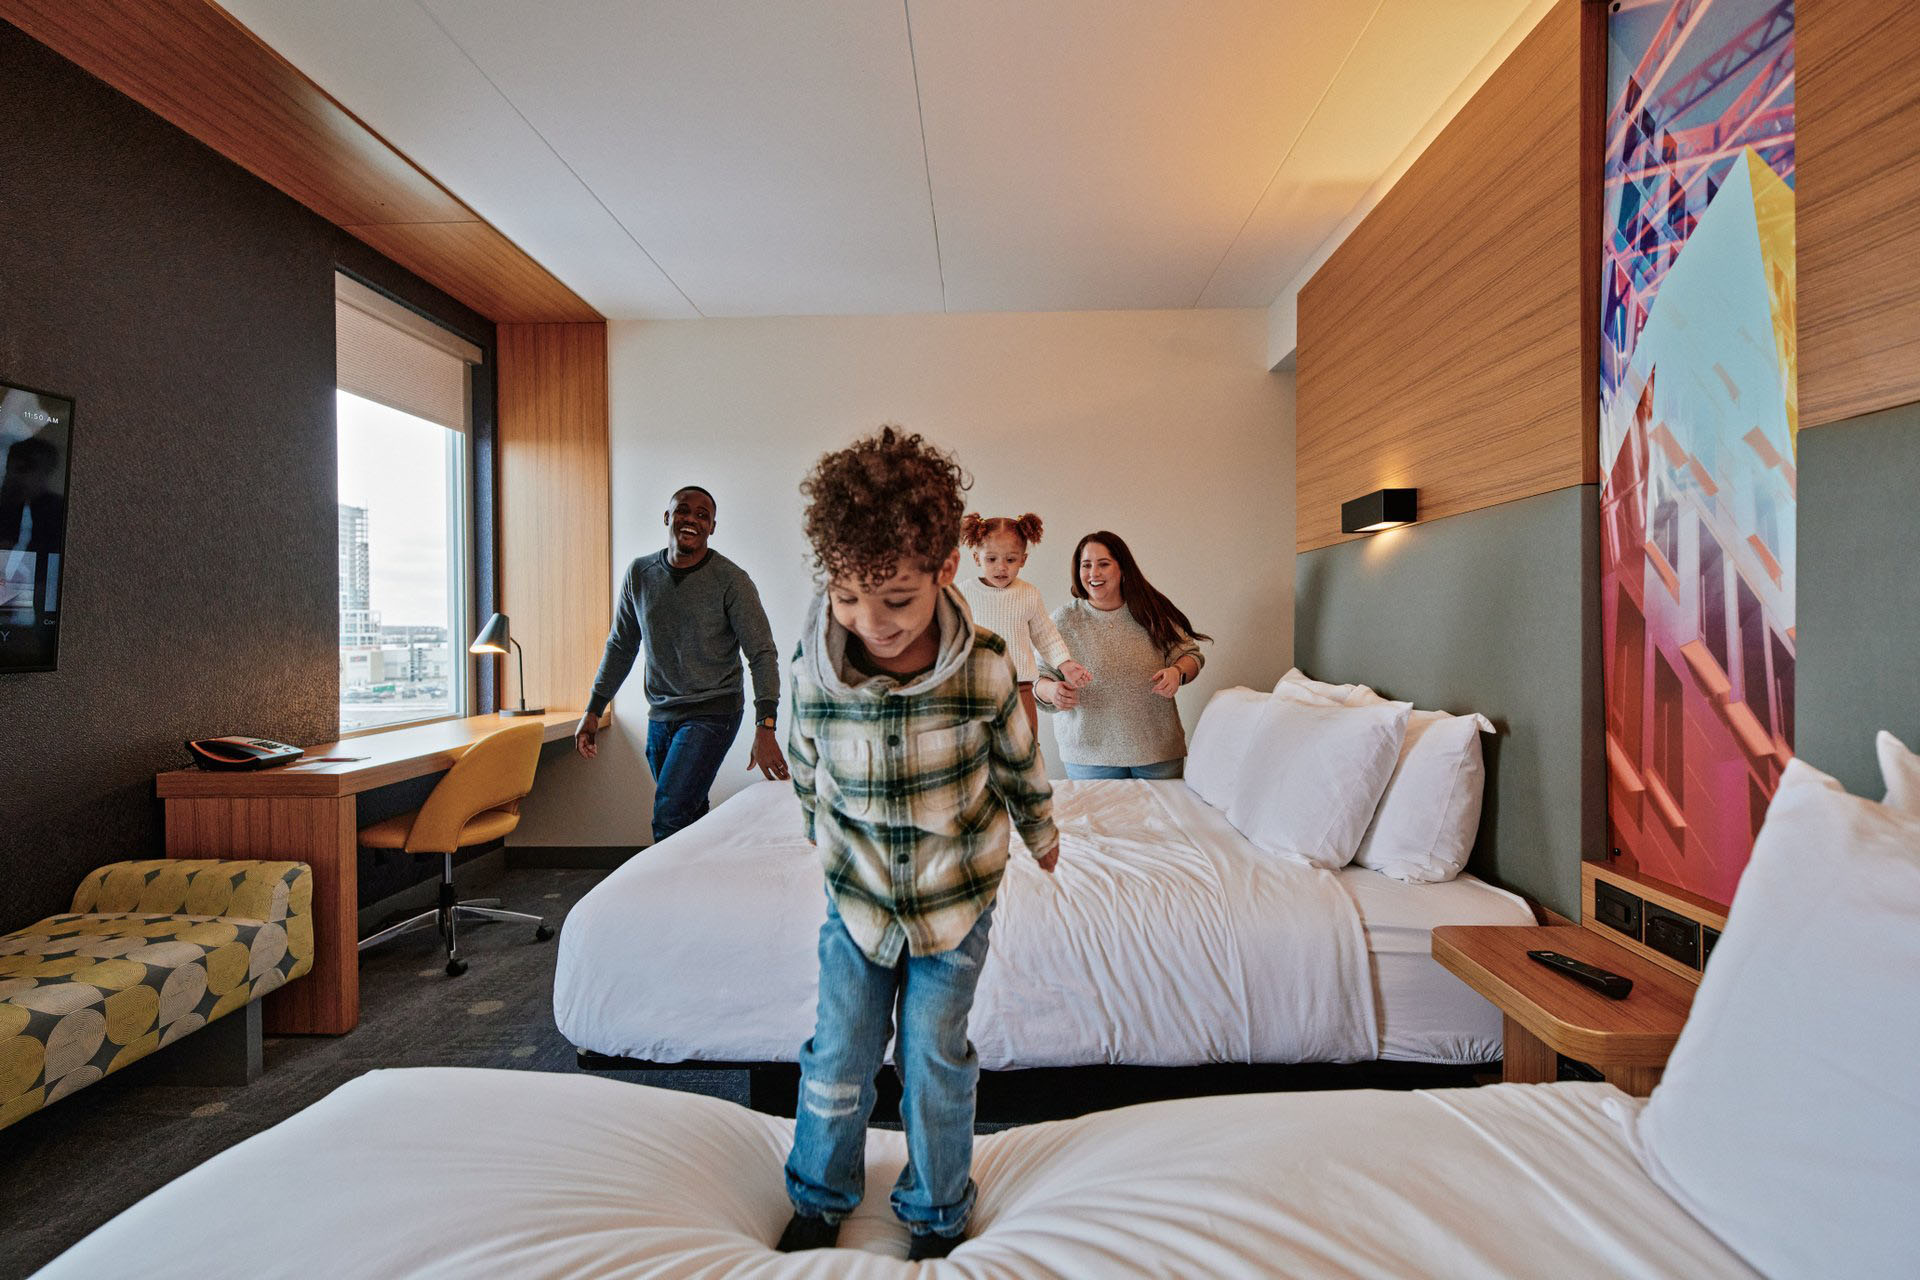 Kid Jumping on Bed in Hotel Room